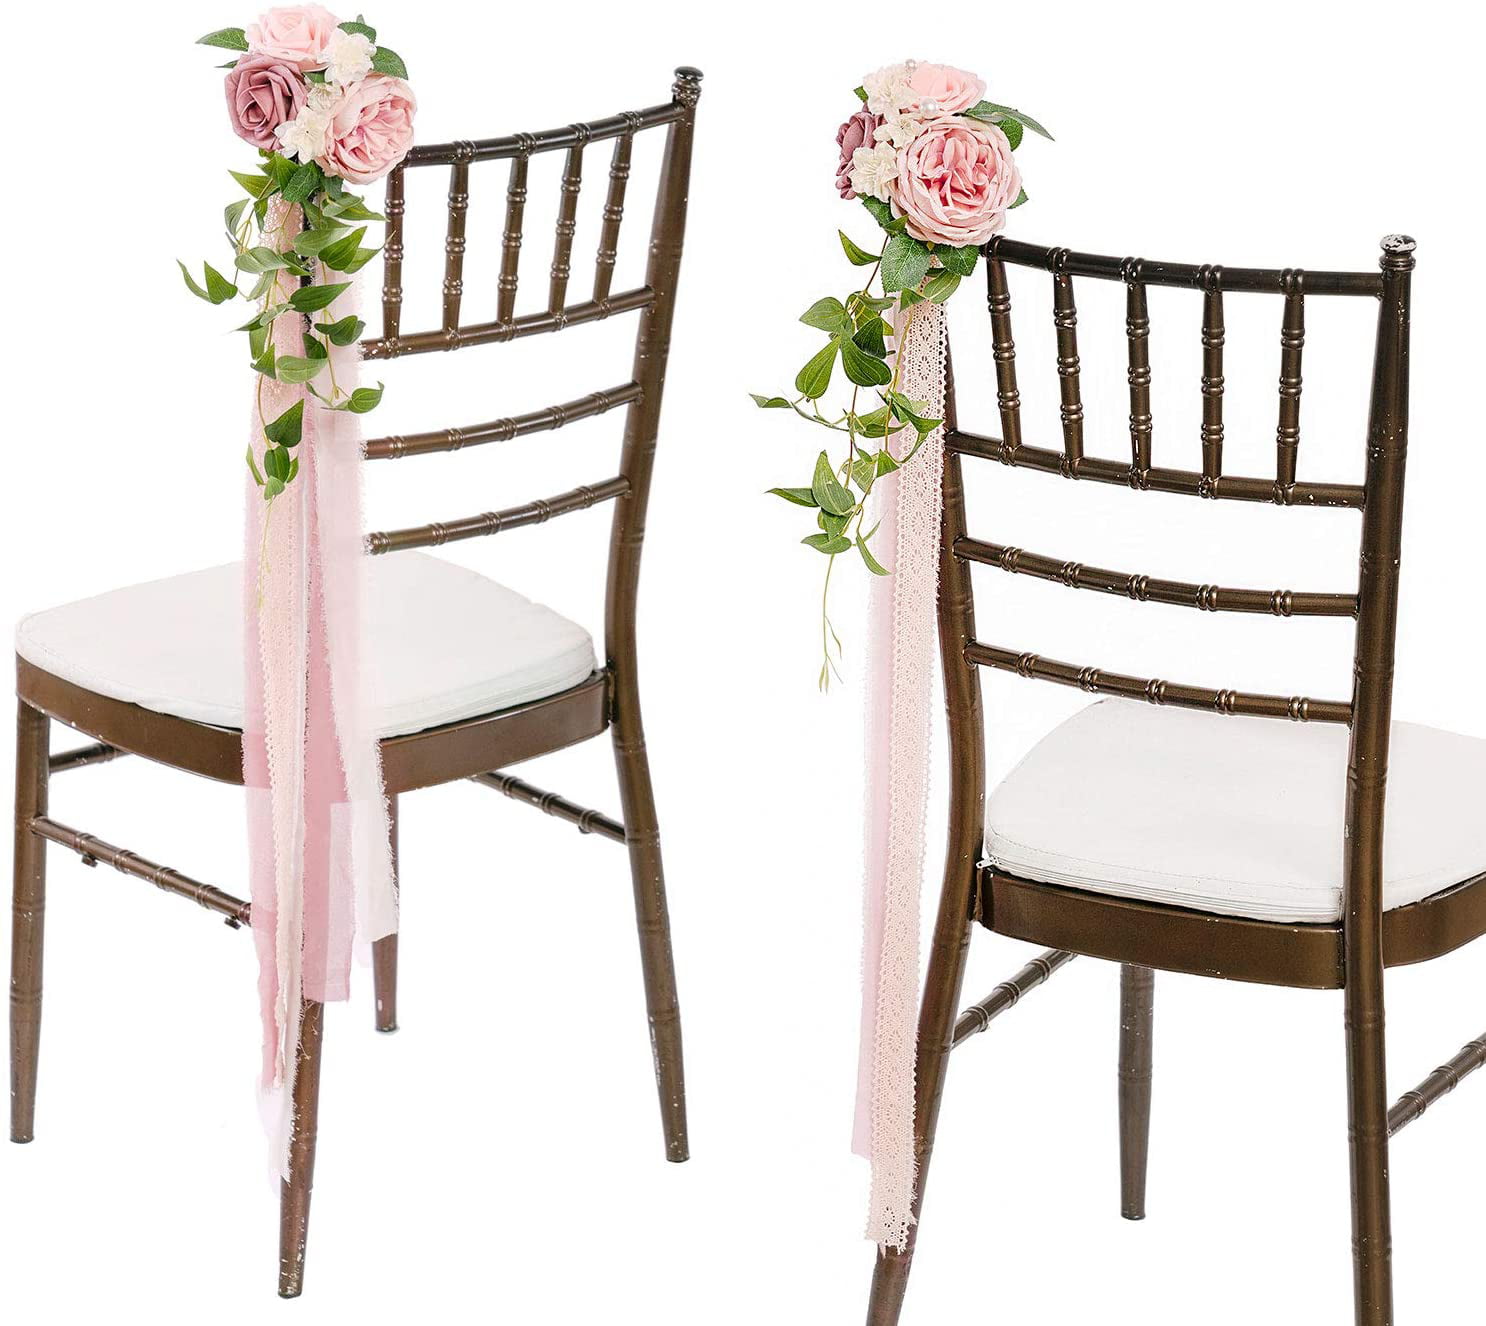 2pcs Fancy handmade wedding flower chair back band bow decor covers for wedding 